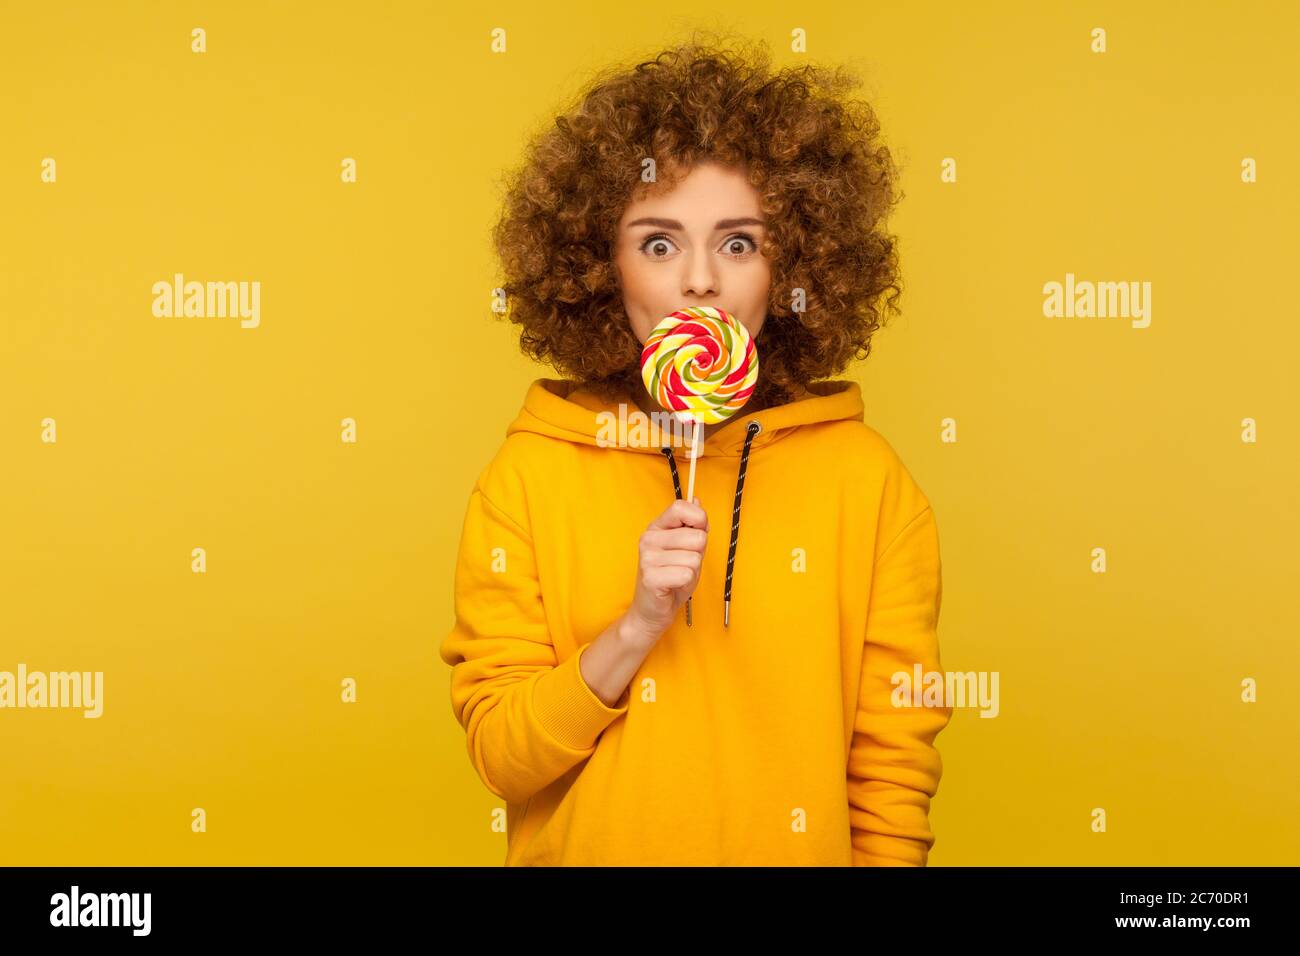 Sweet rainbow candy. Portrait of positive modern curly-haired woman in urban style hoodie licking lollipop and looking at camera with amazed expressio Stock Photo